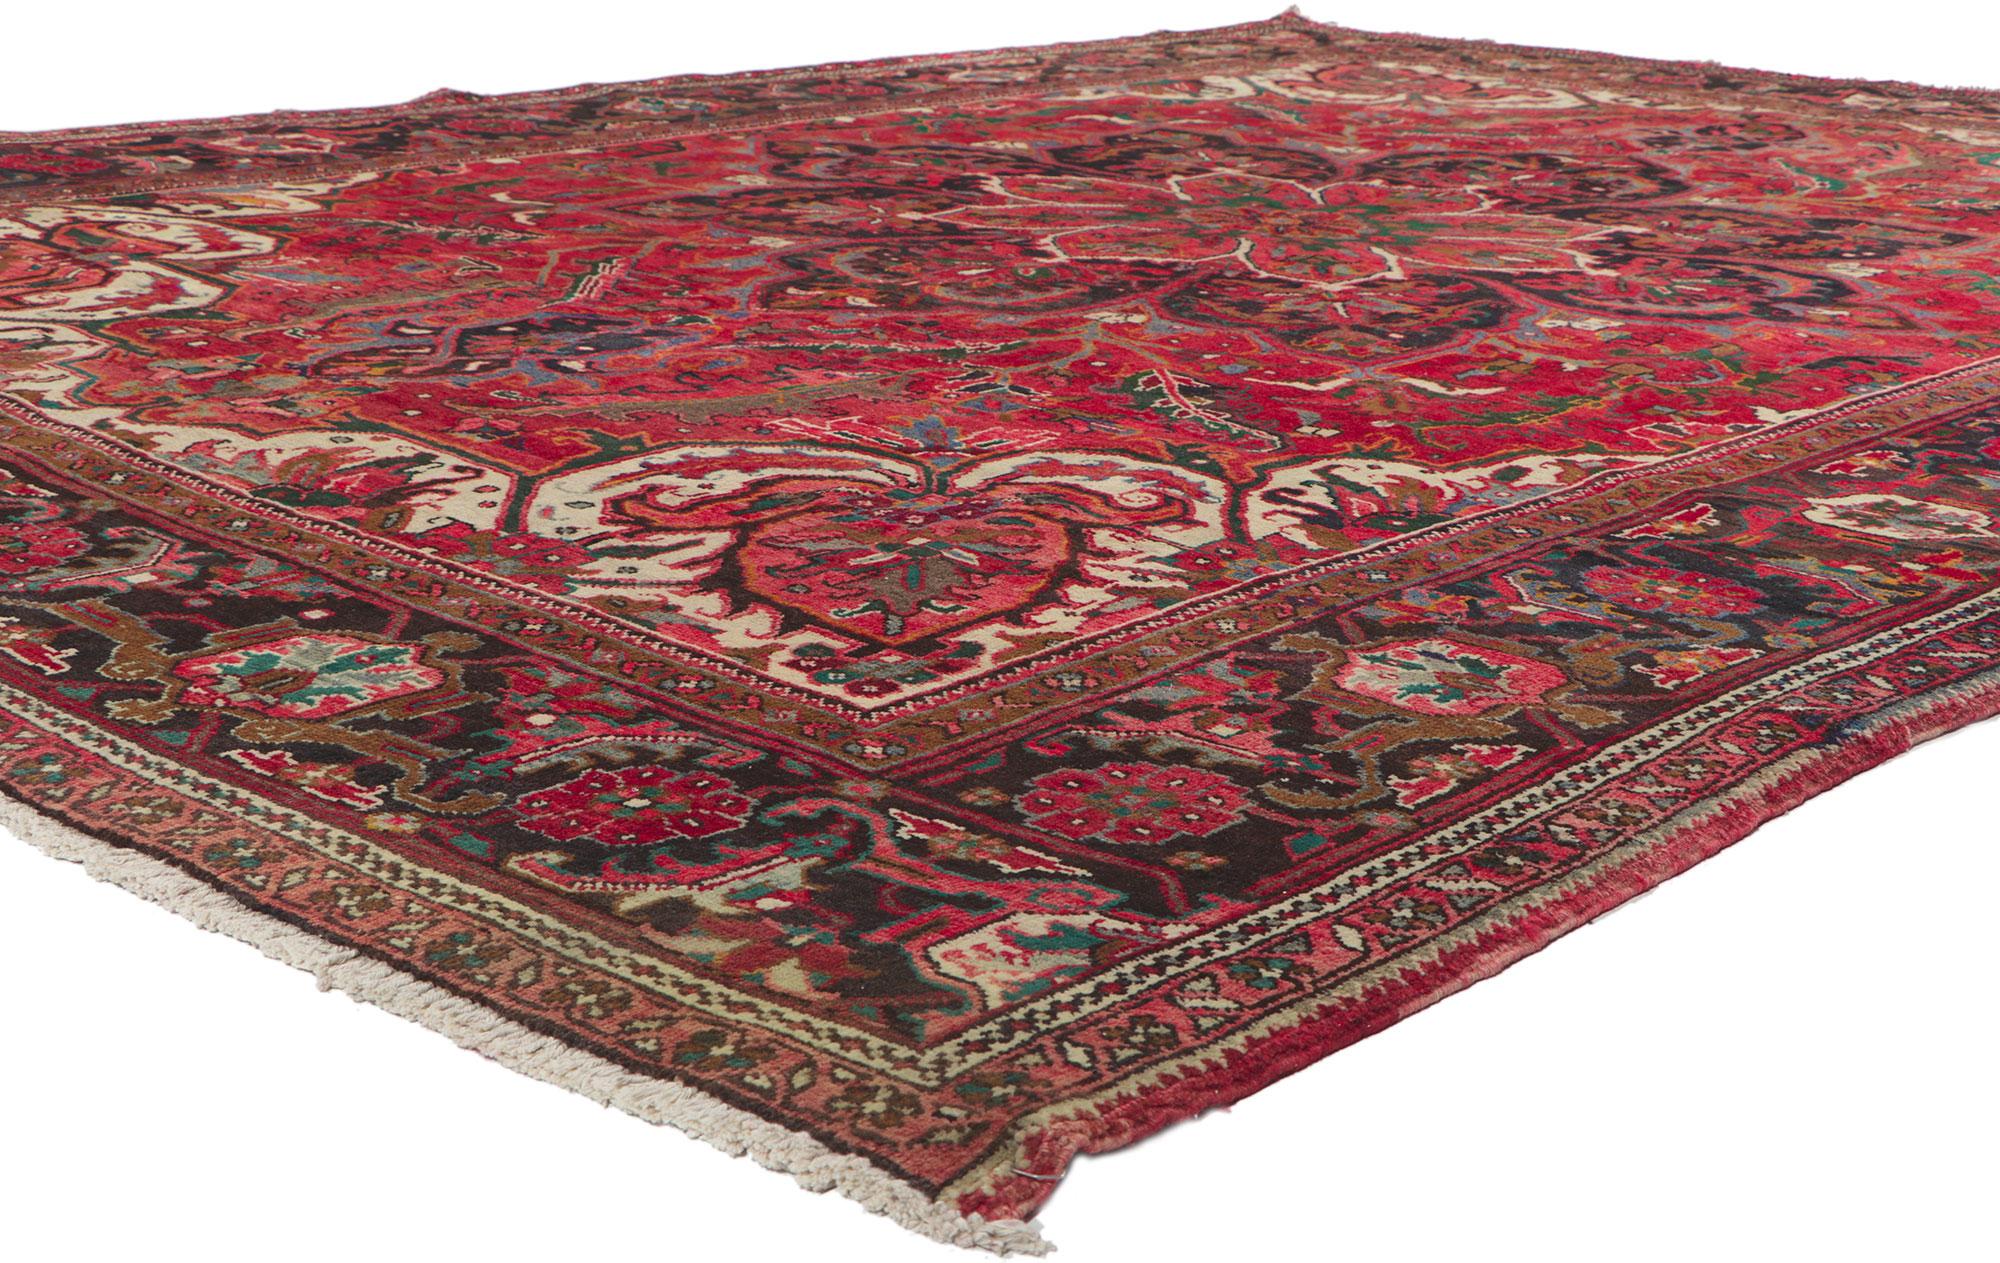 61171 Vintage Persian Heriz Rug, 09'05 x 12'05. Warm and inviting with a classic style, this hand-knotted wool vintage Persian Heriz rug charms with ease. The abrashed red field features a concentric octogram medallion surrounded by an allover